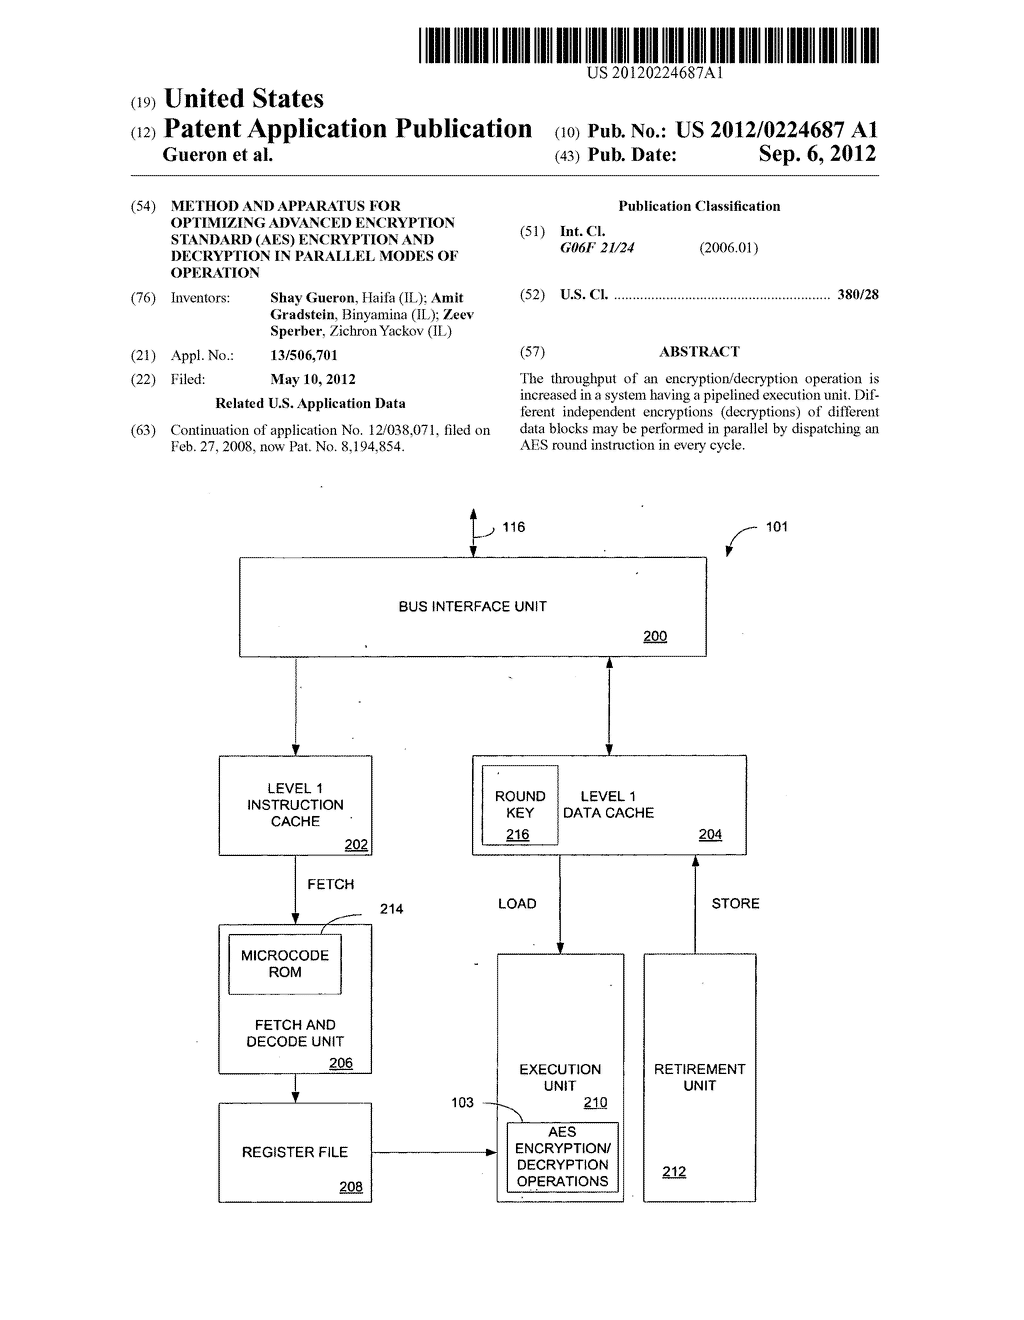 Method and apparatus for optimizing Advanced Encryption Standard (AES)     encryption and decryption in parallel modes of operation - diagram, schematic, and image 01